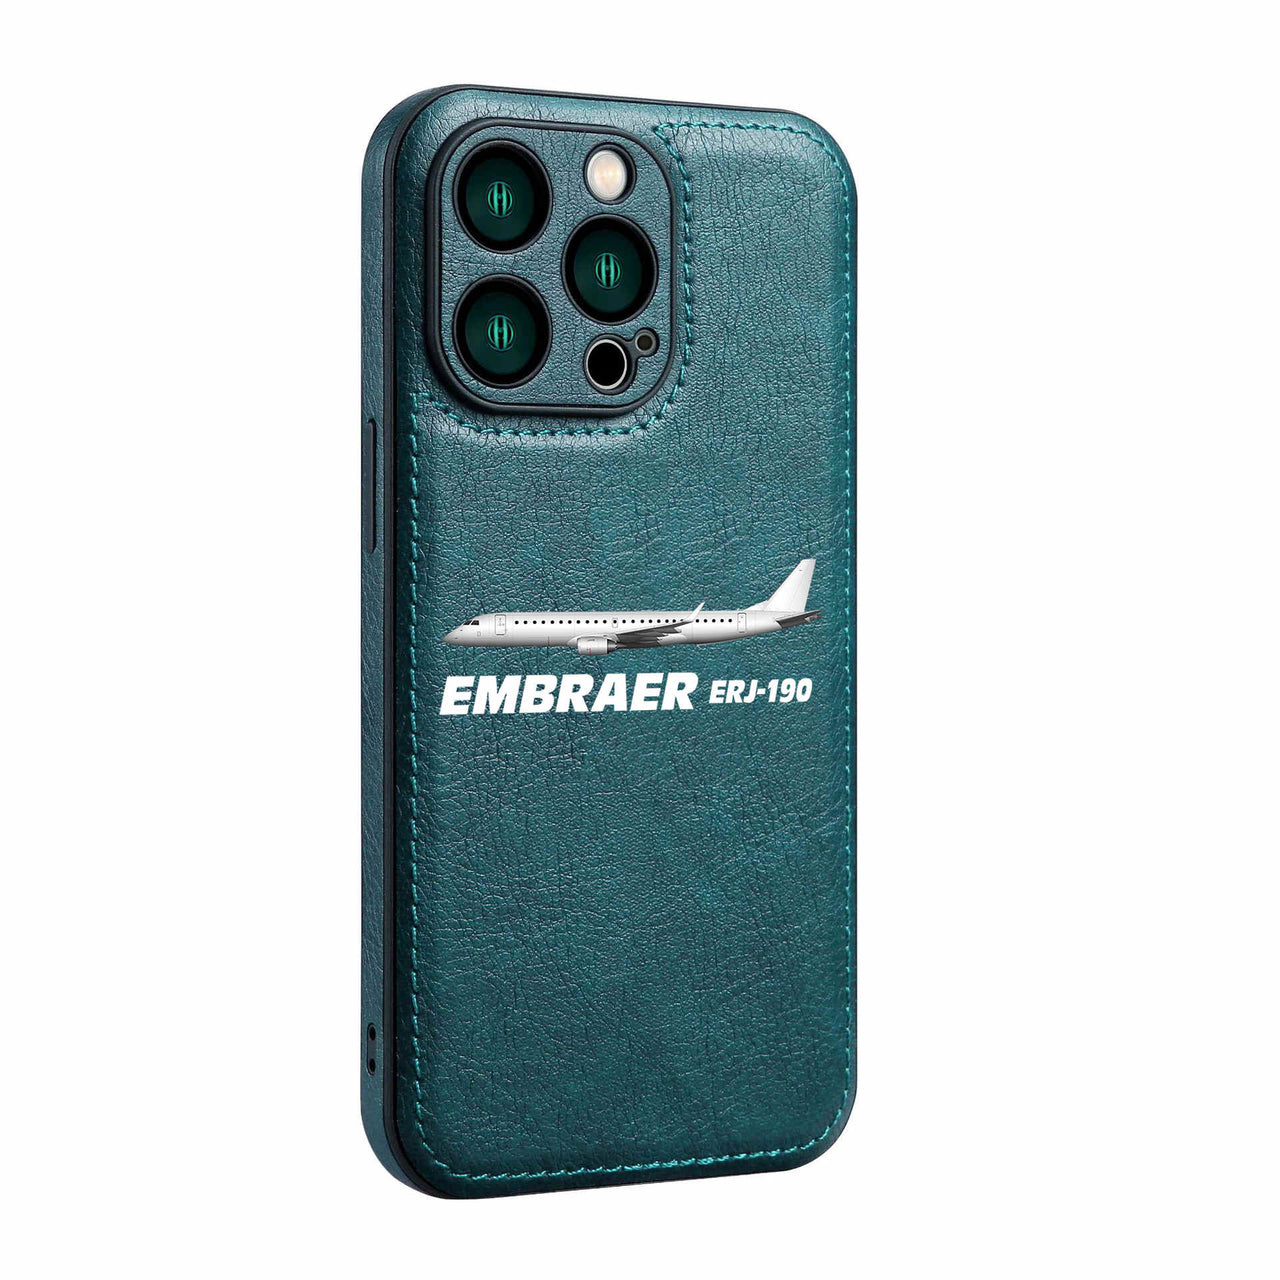 The Embraer ERJ-190 Designed Leather iPhone Cases